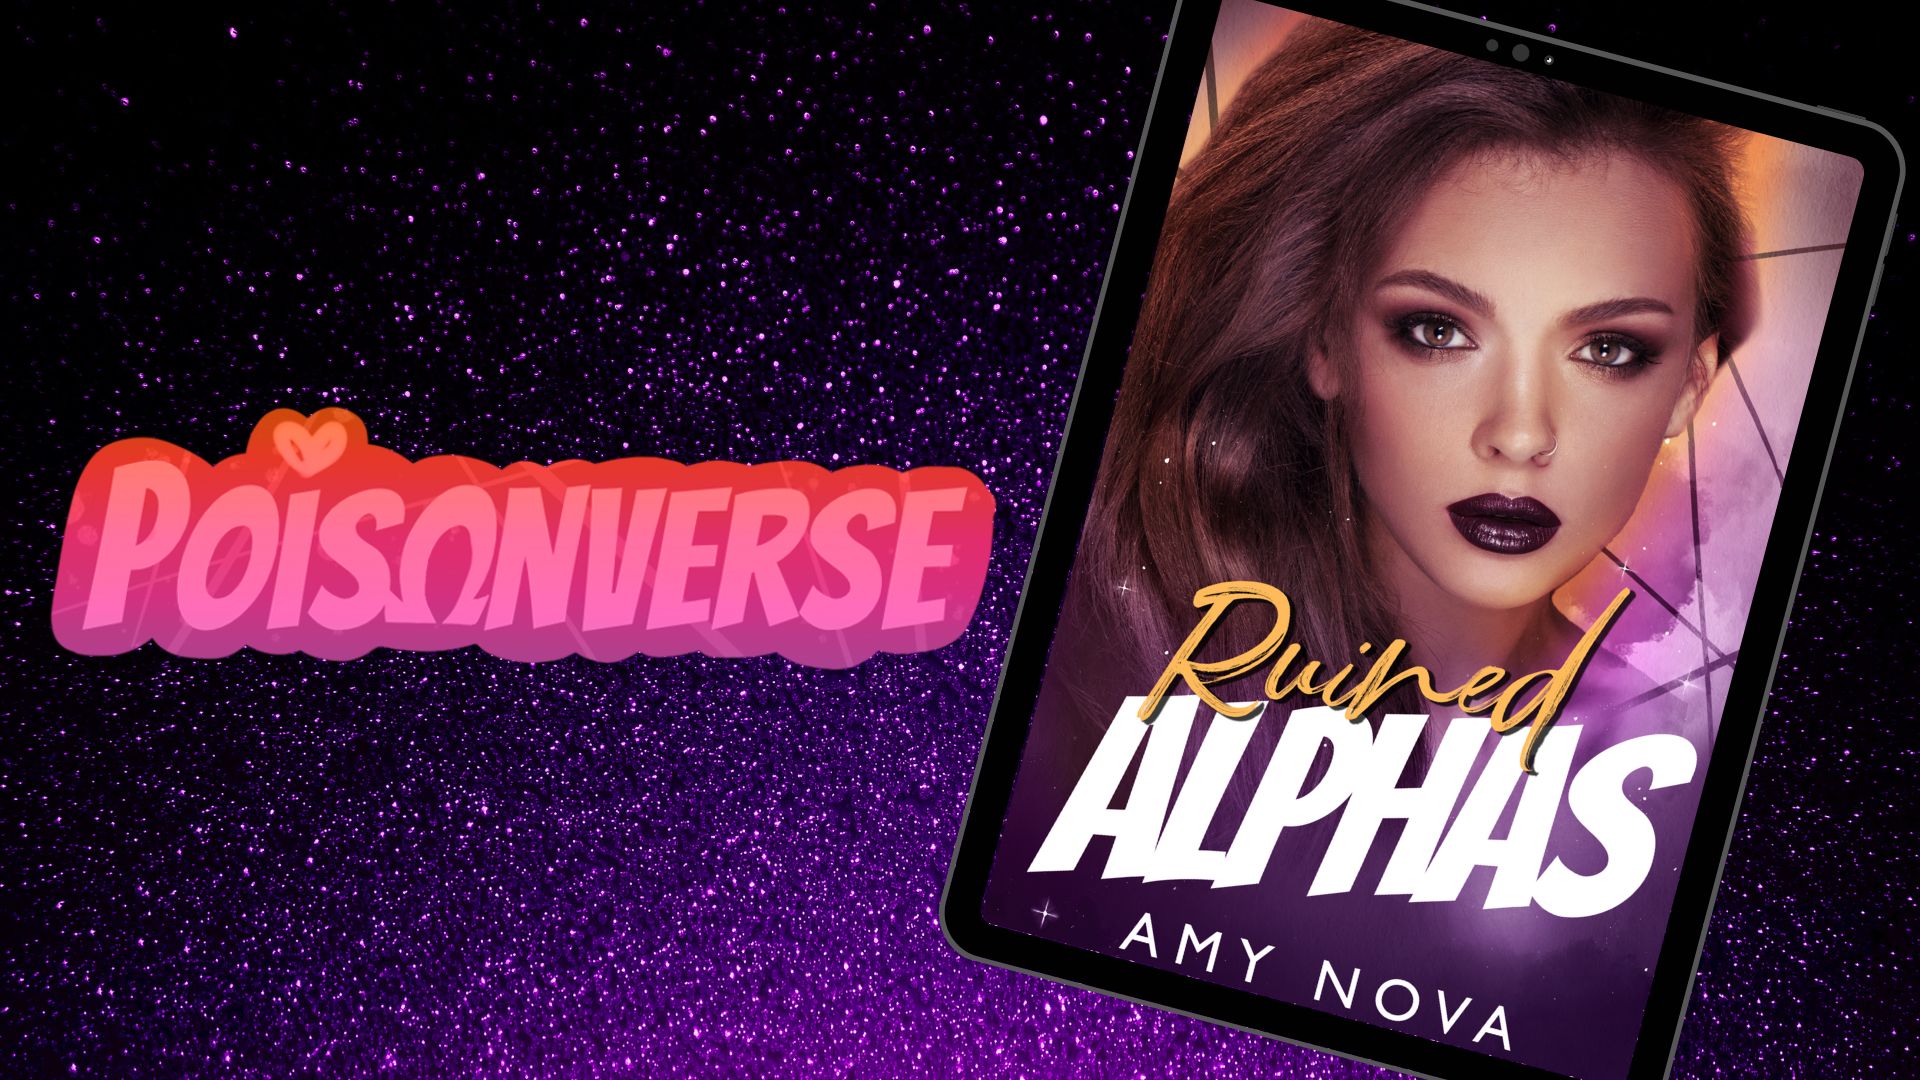 PoisonVerse - Ruined Alphas